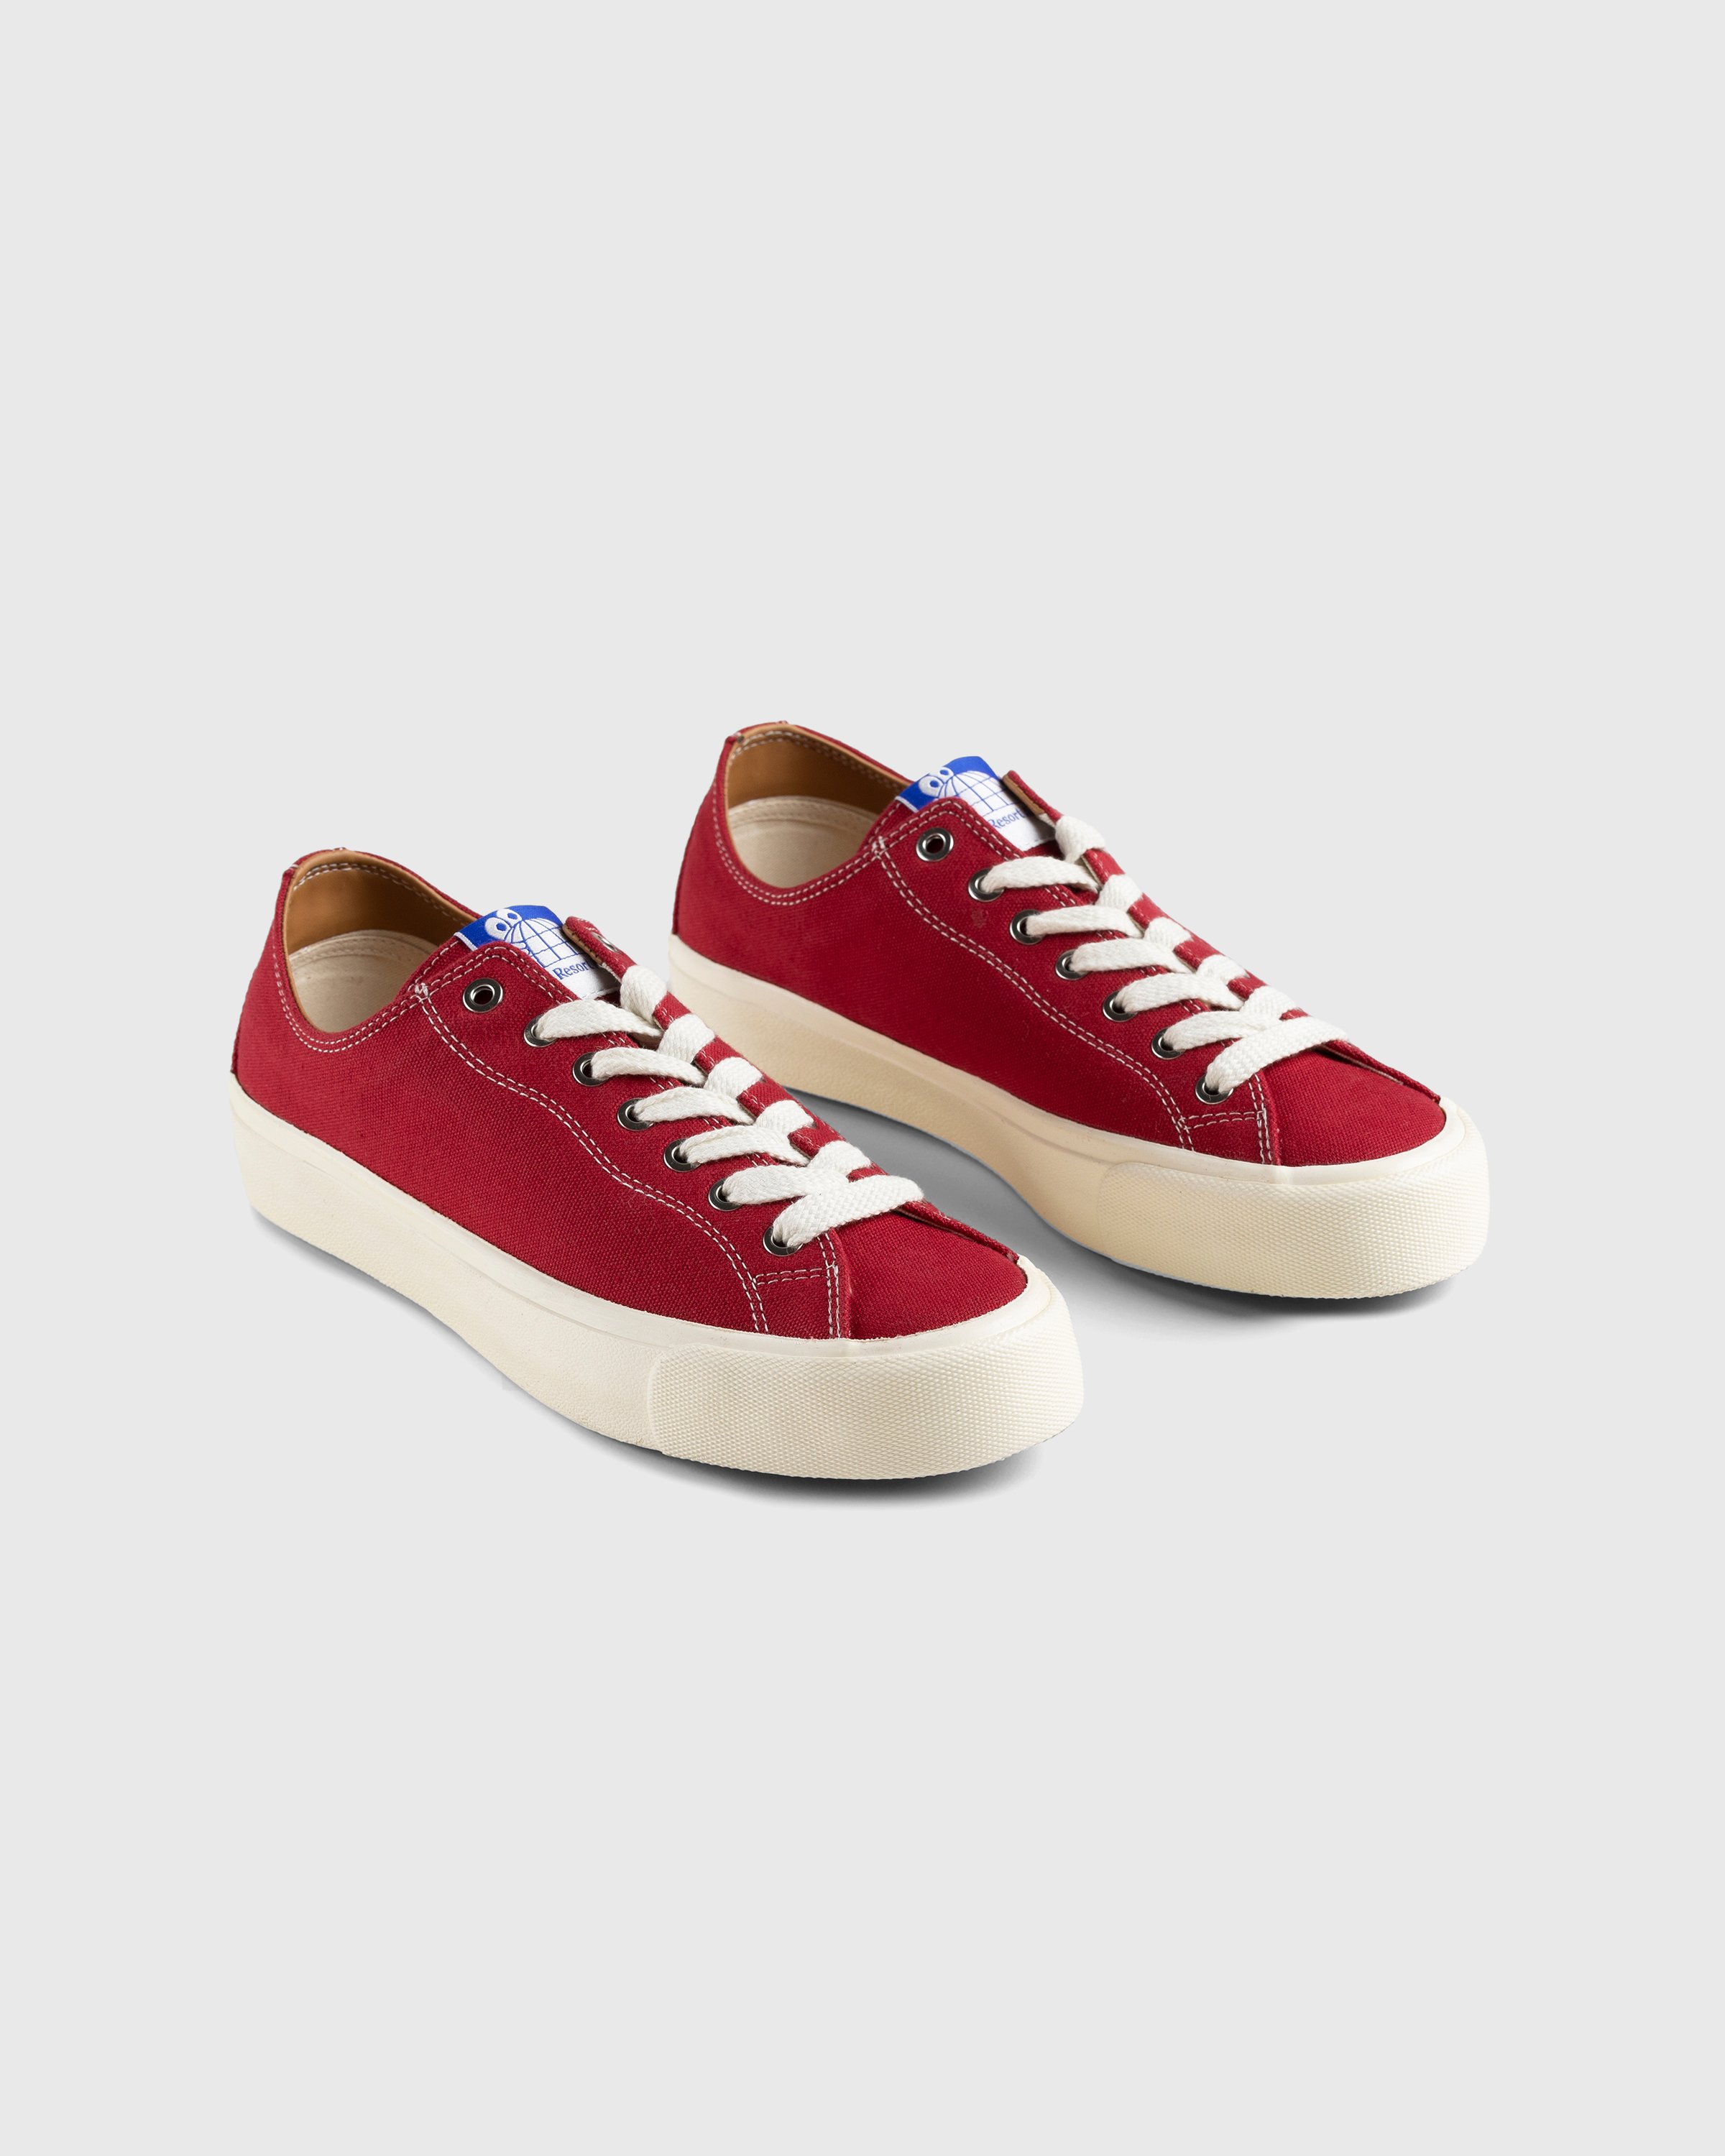 Last Resort AB - VM003-Canvas LO Classic Red/White - Footwear - Red - Image 3